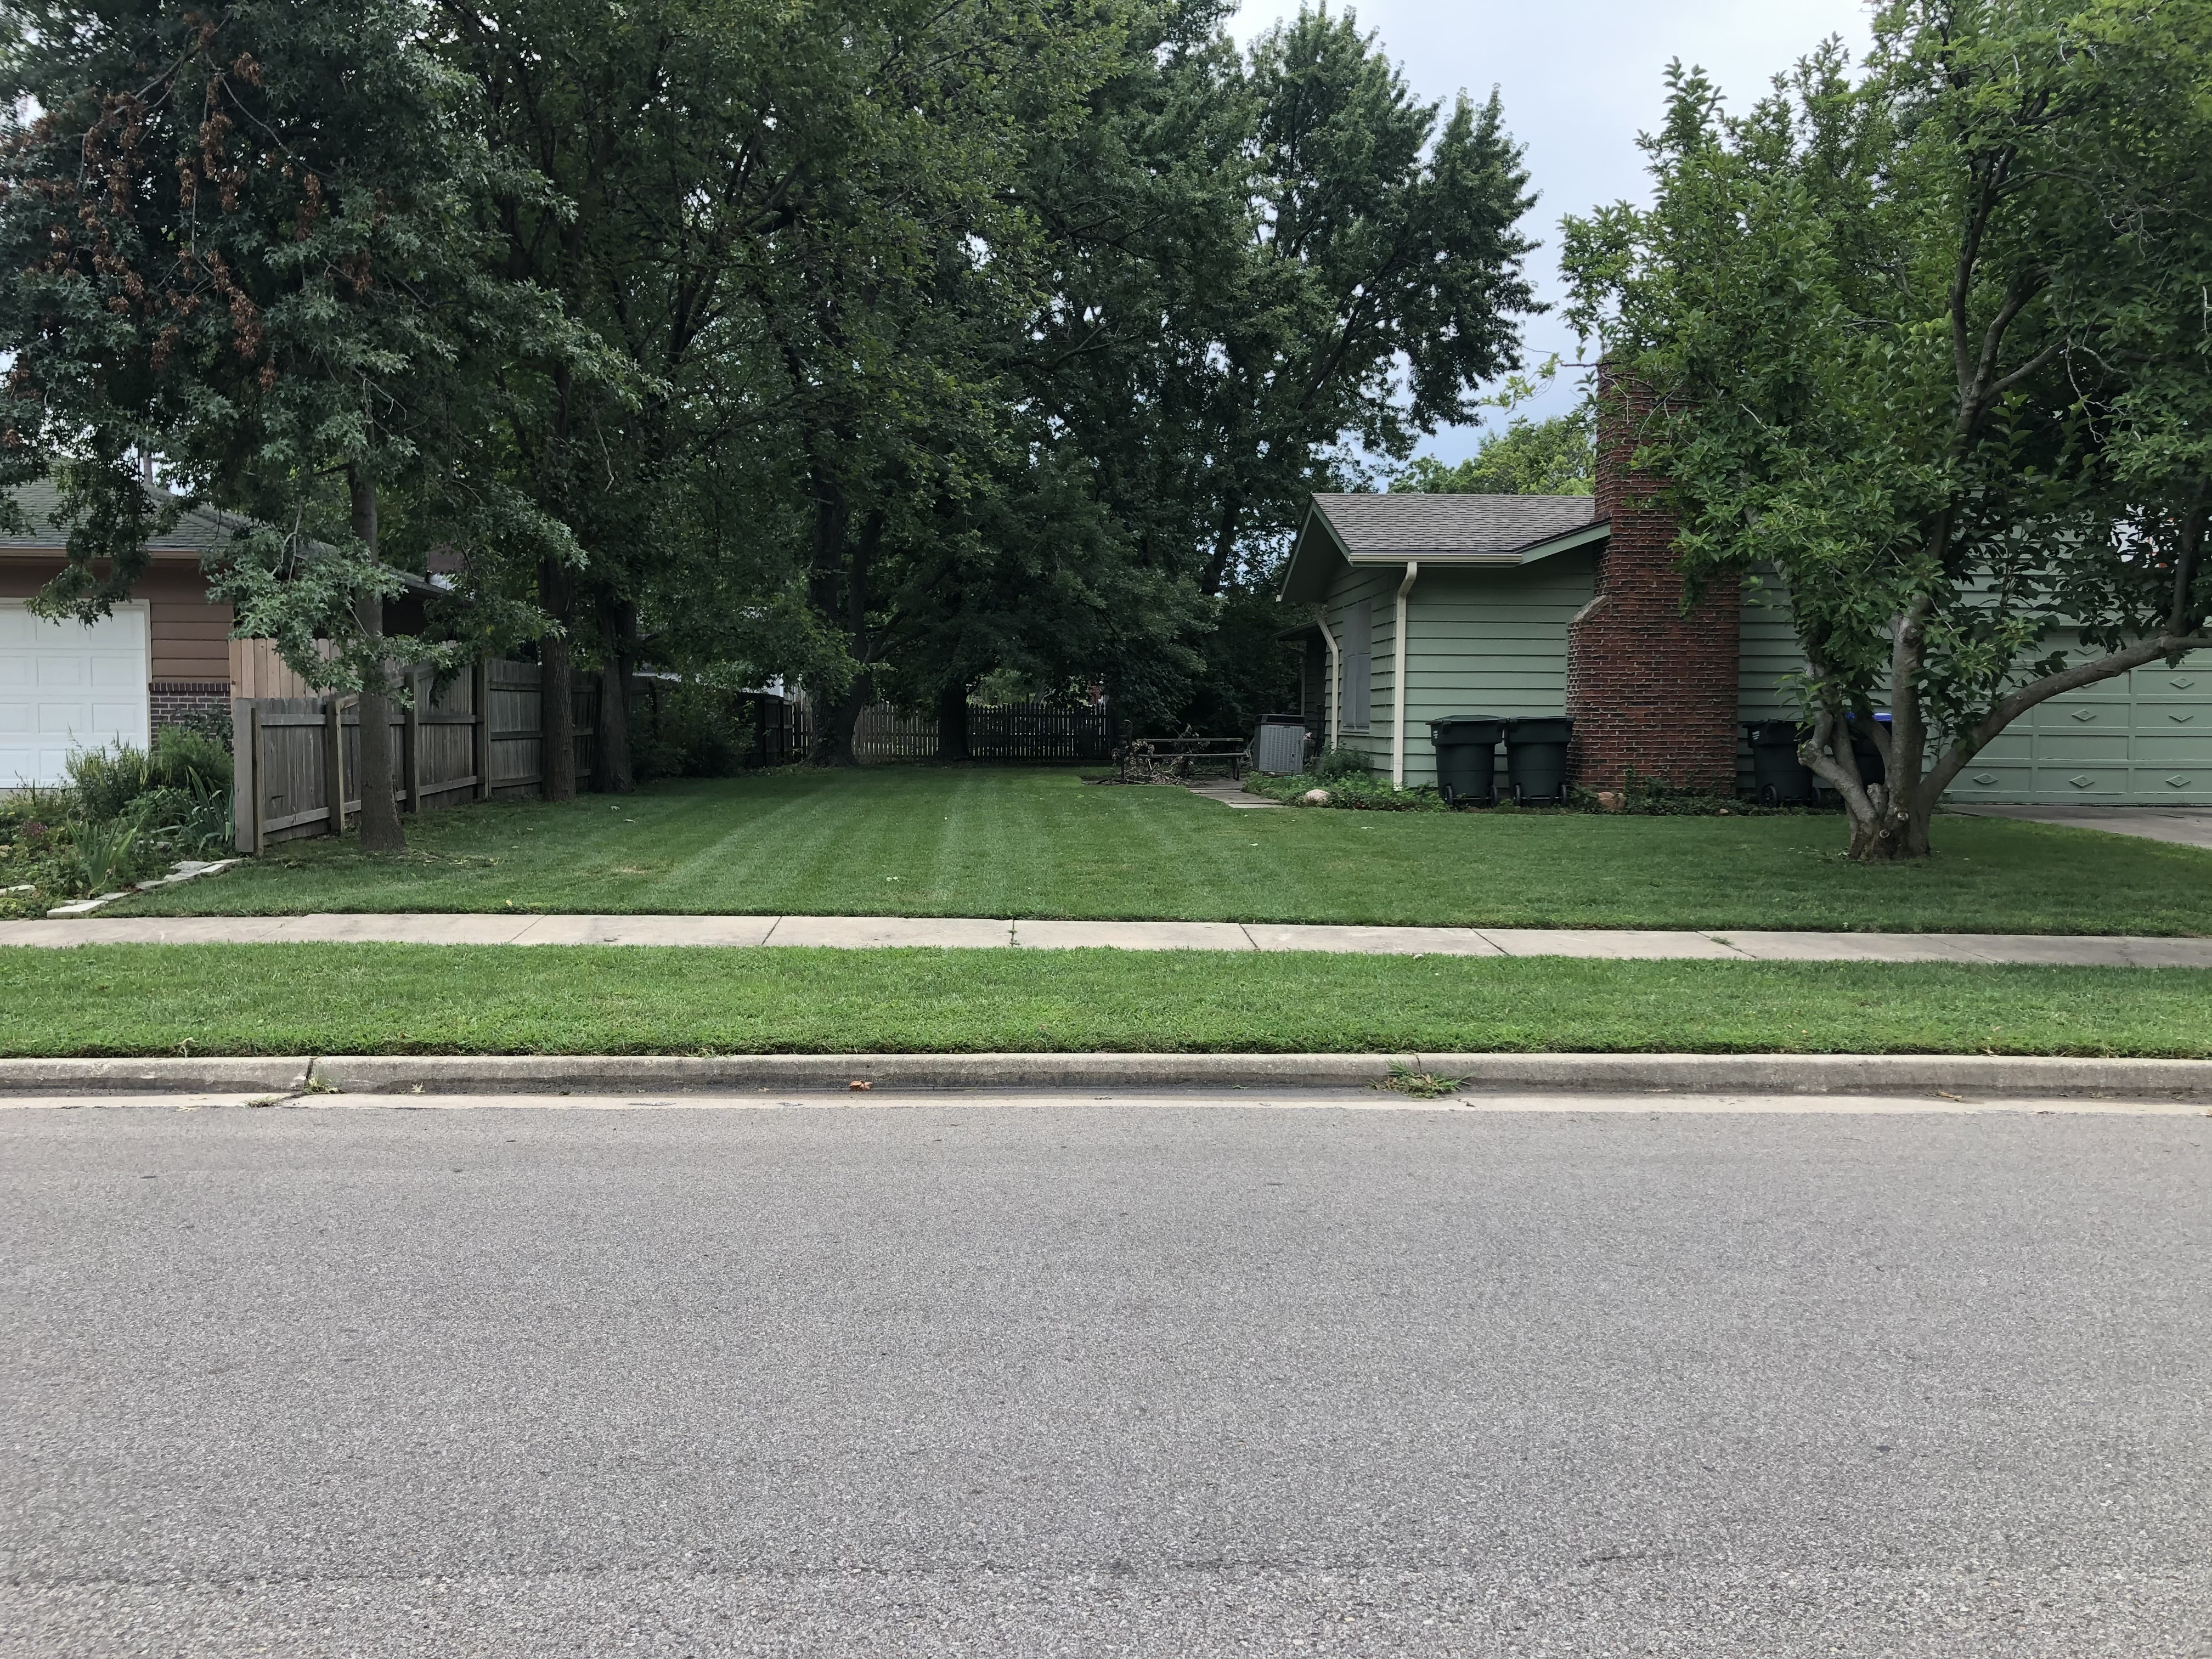 Lawn Work Example